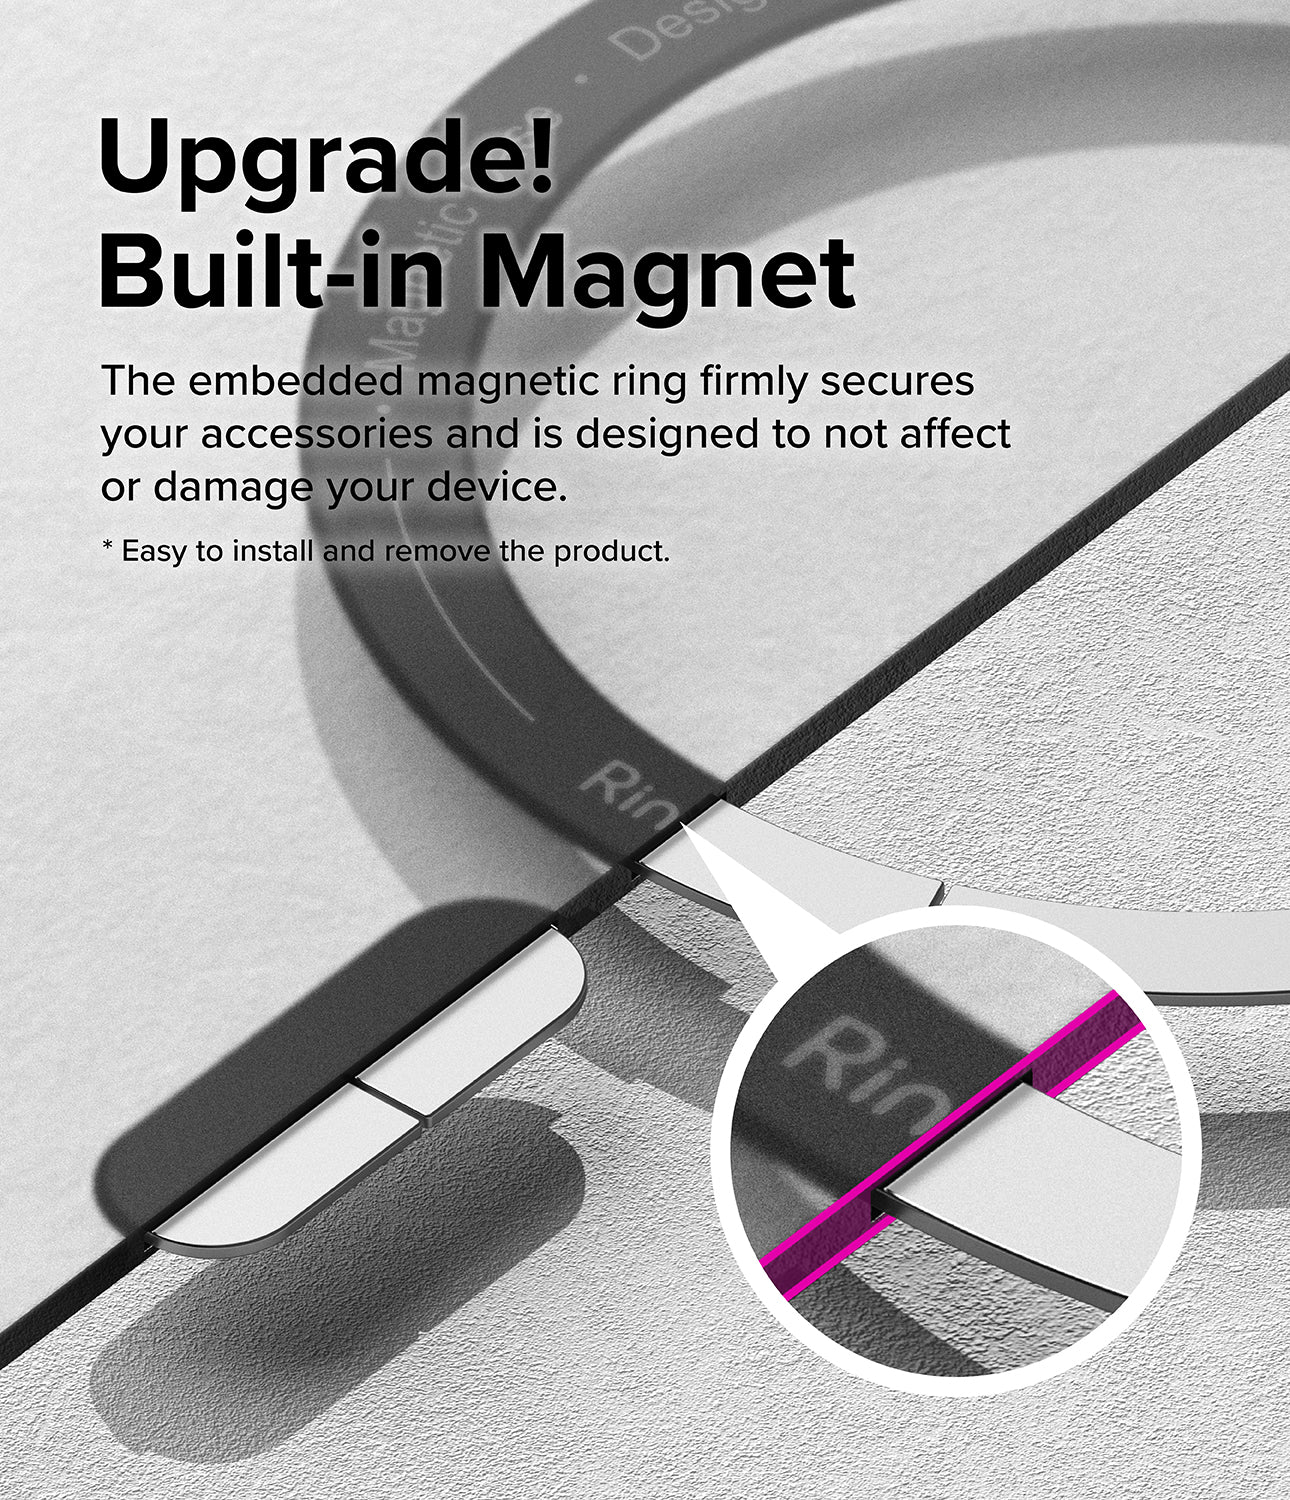 iPhone 15 Case | Fusion Bold Magnetic - Upgrade! Built-in Magnet. The embedded magnetic ring firmly secures your accessories and is designed to not affect or damage your device.